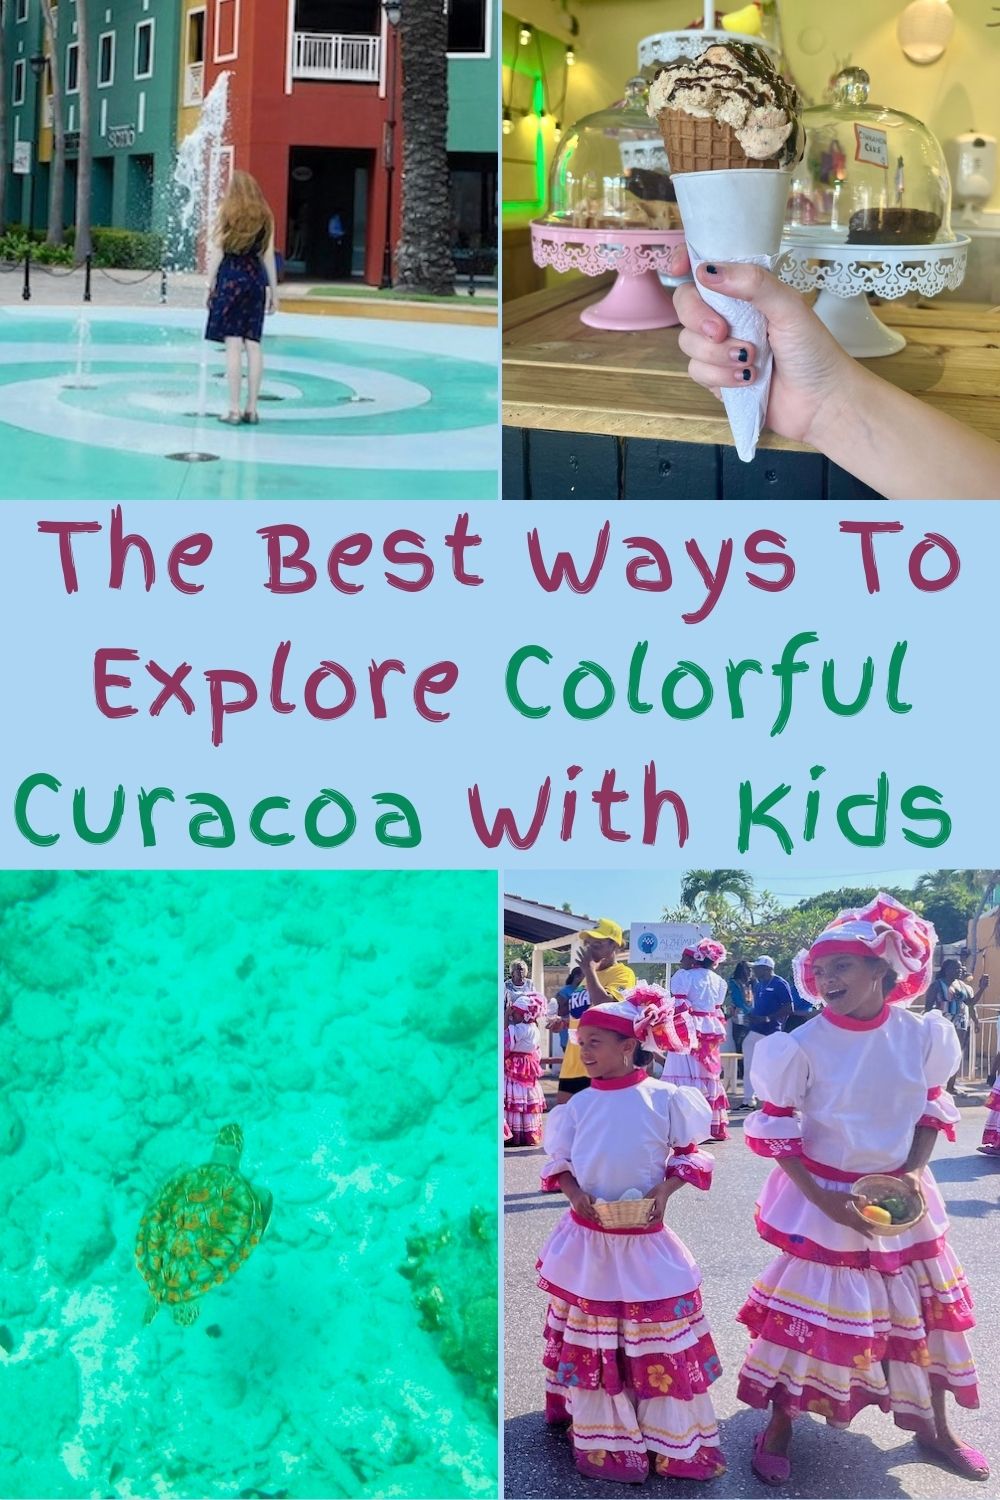 curacao is an island with colorful buildings, street art, parades and sea life. here's how to explore and discover this caribbean island with kids.